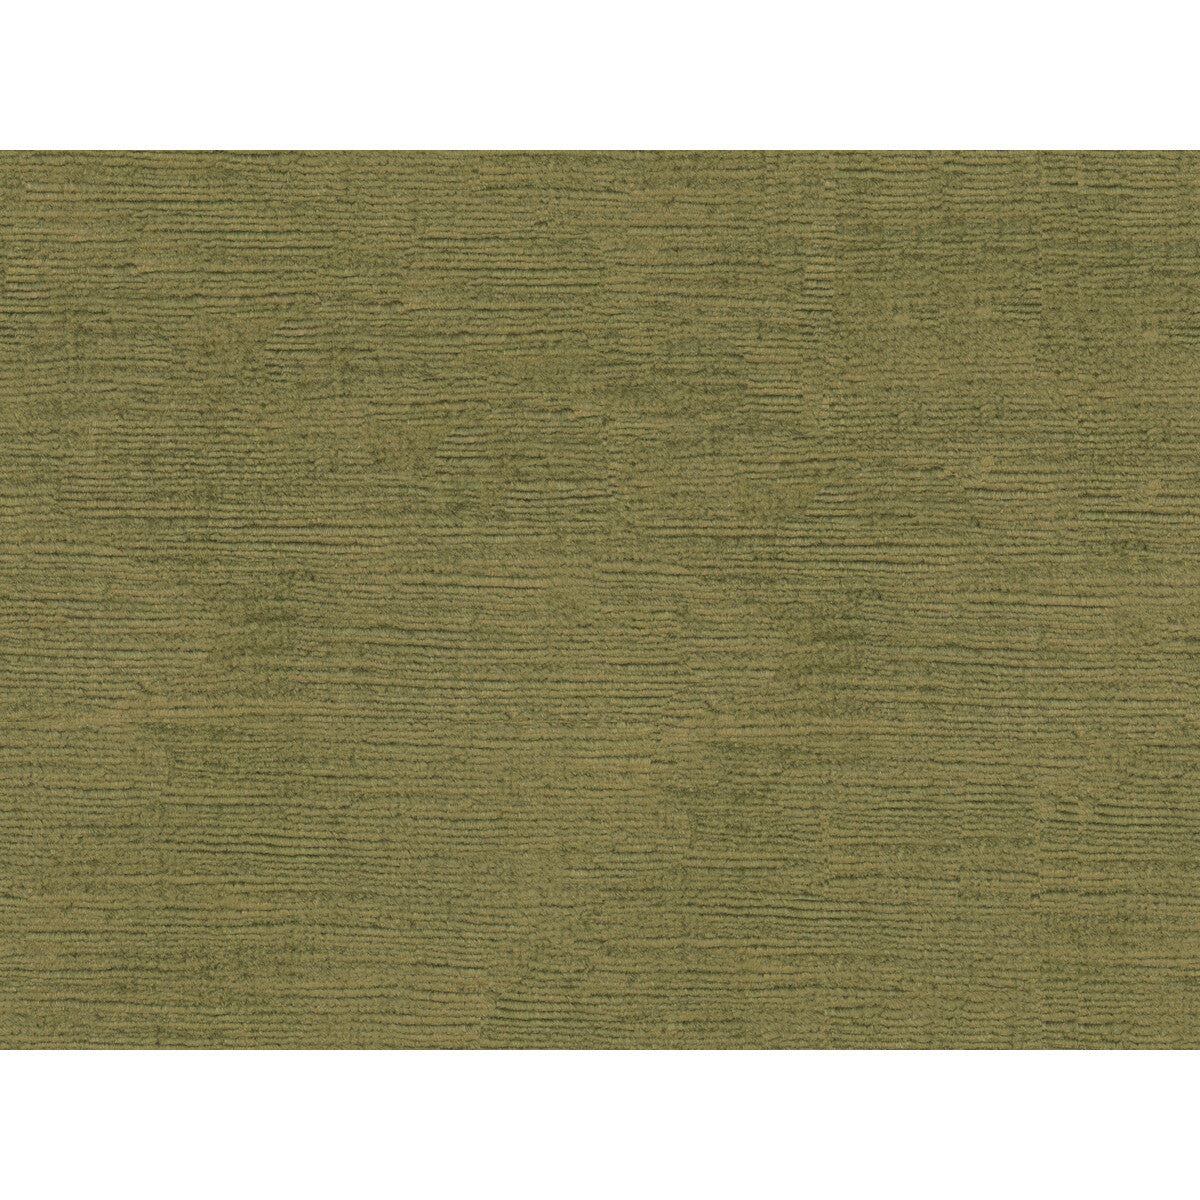 Fulham Linen V fabric in cactus color - pattern 2016133.1633.0 - by Lee Jofa